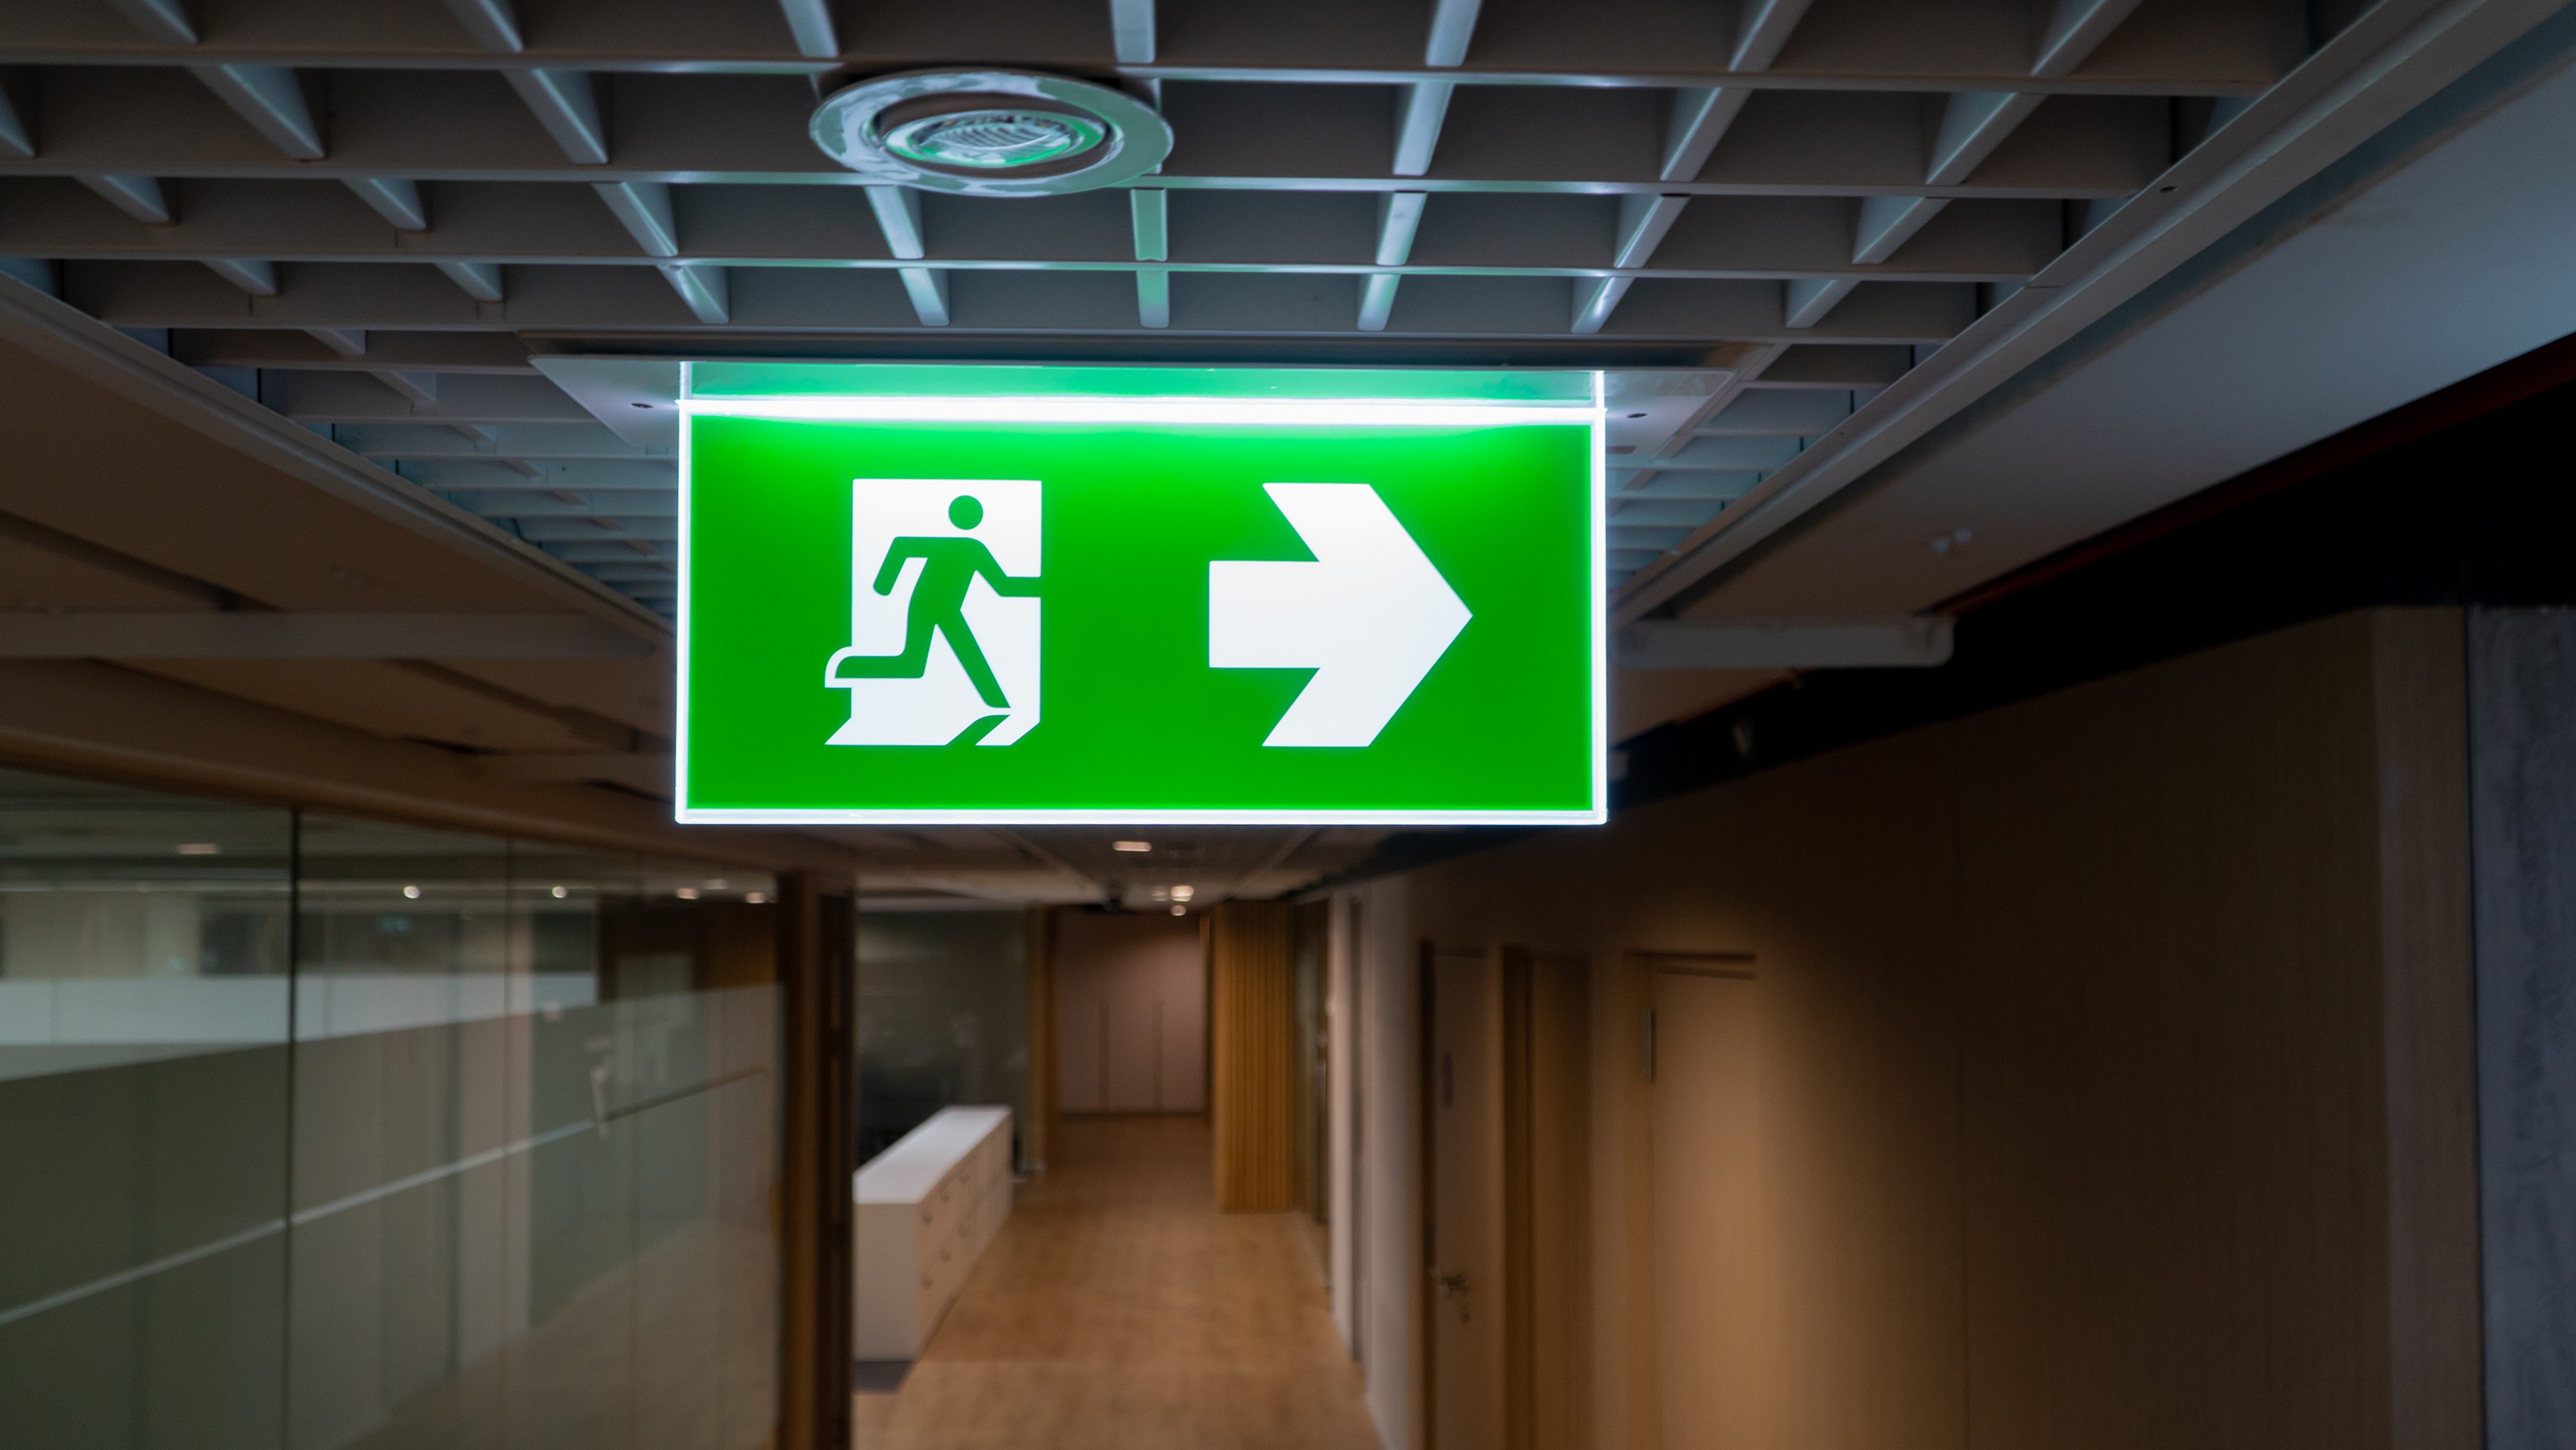 Fire exit sign on ceiling